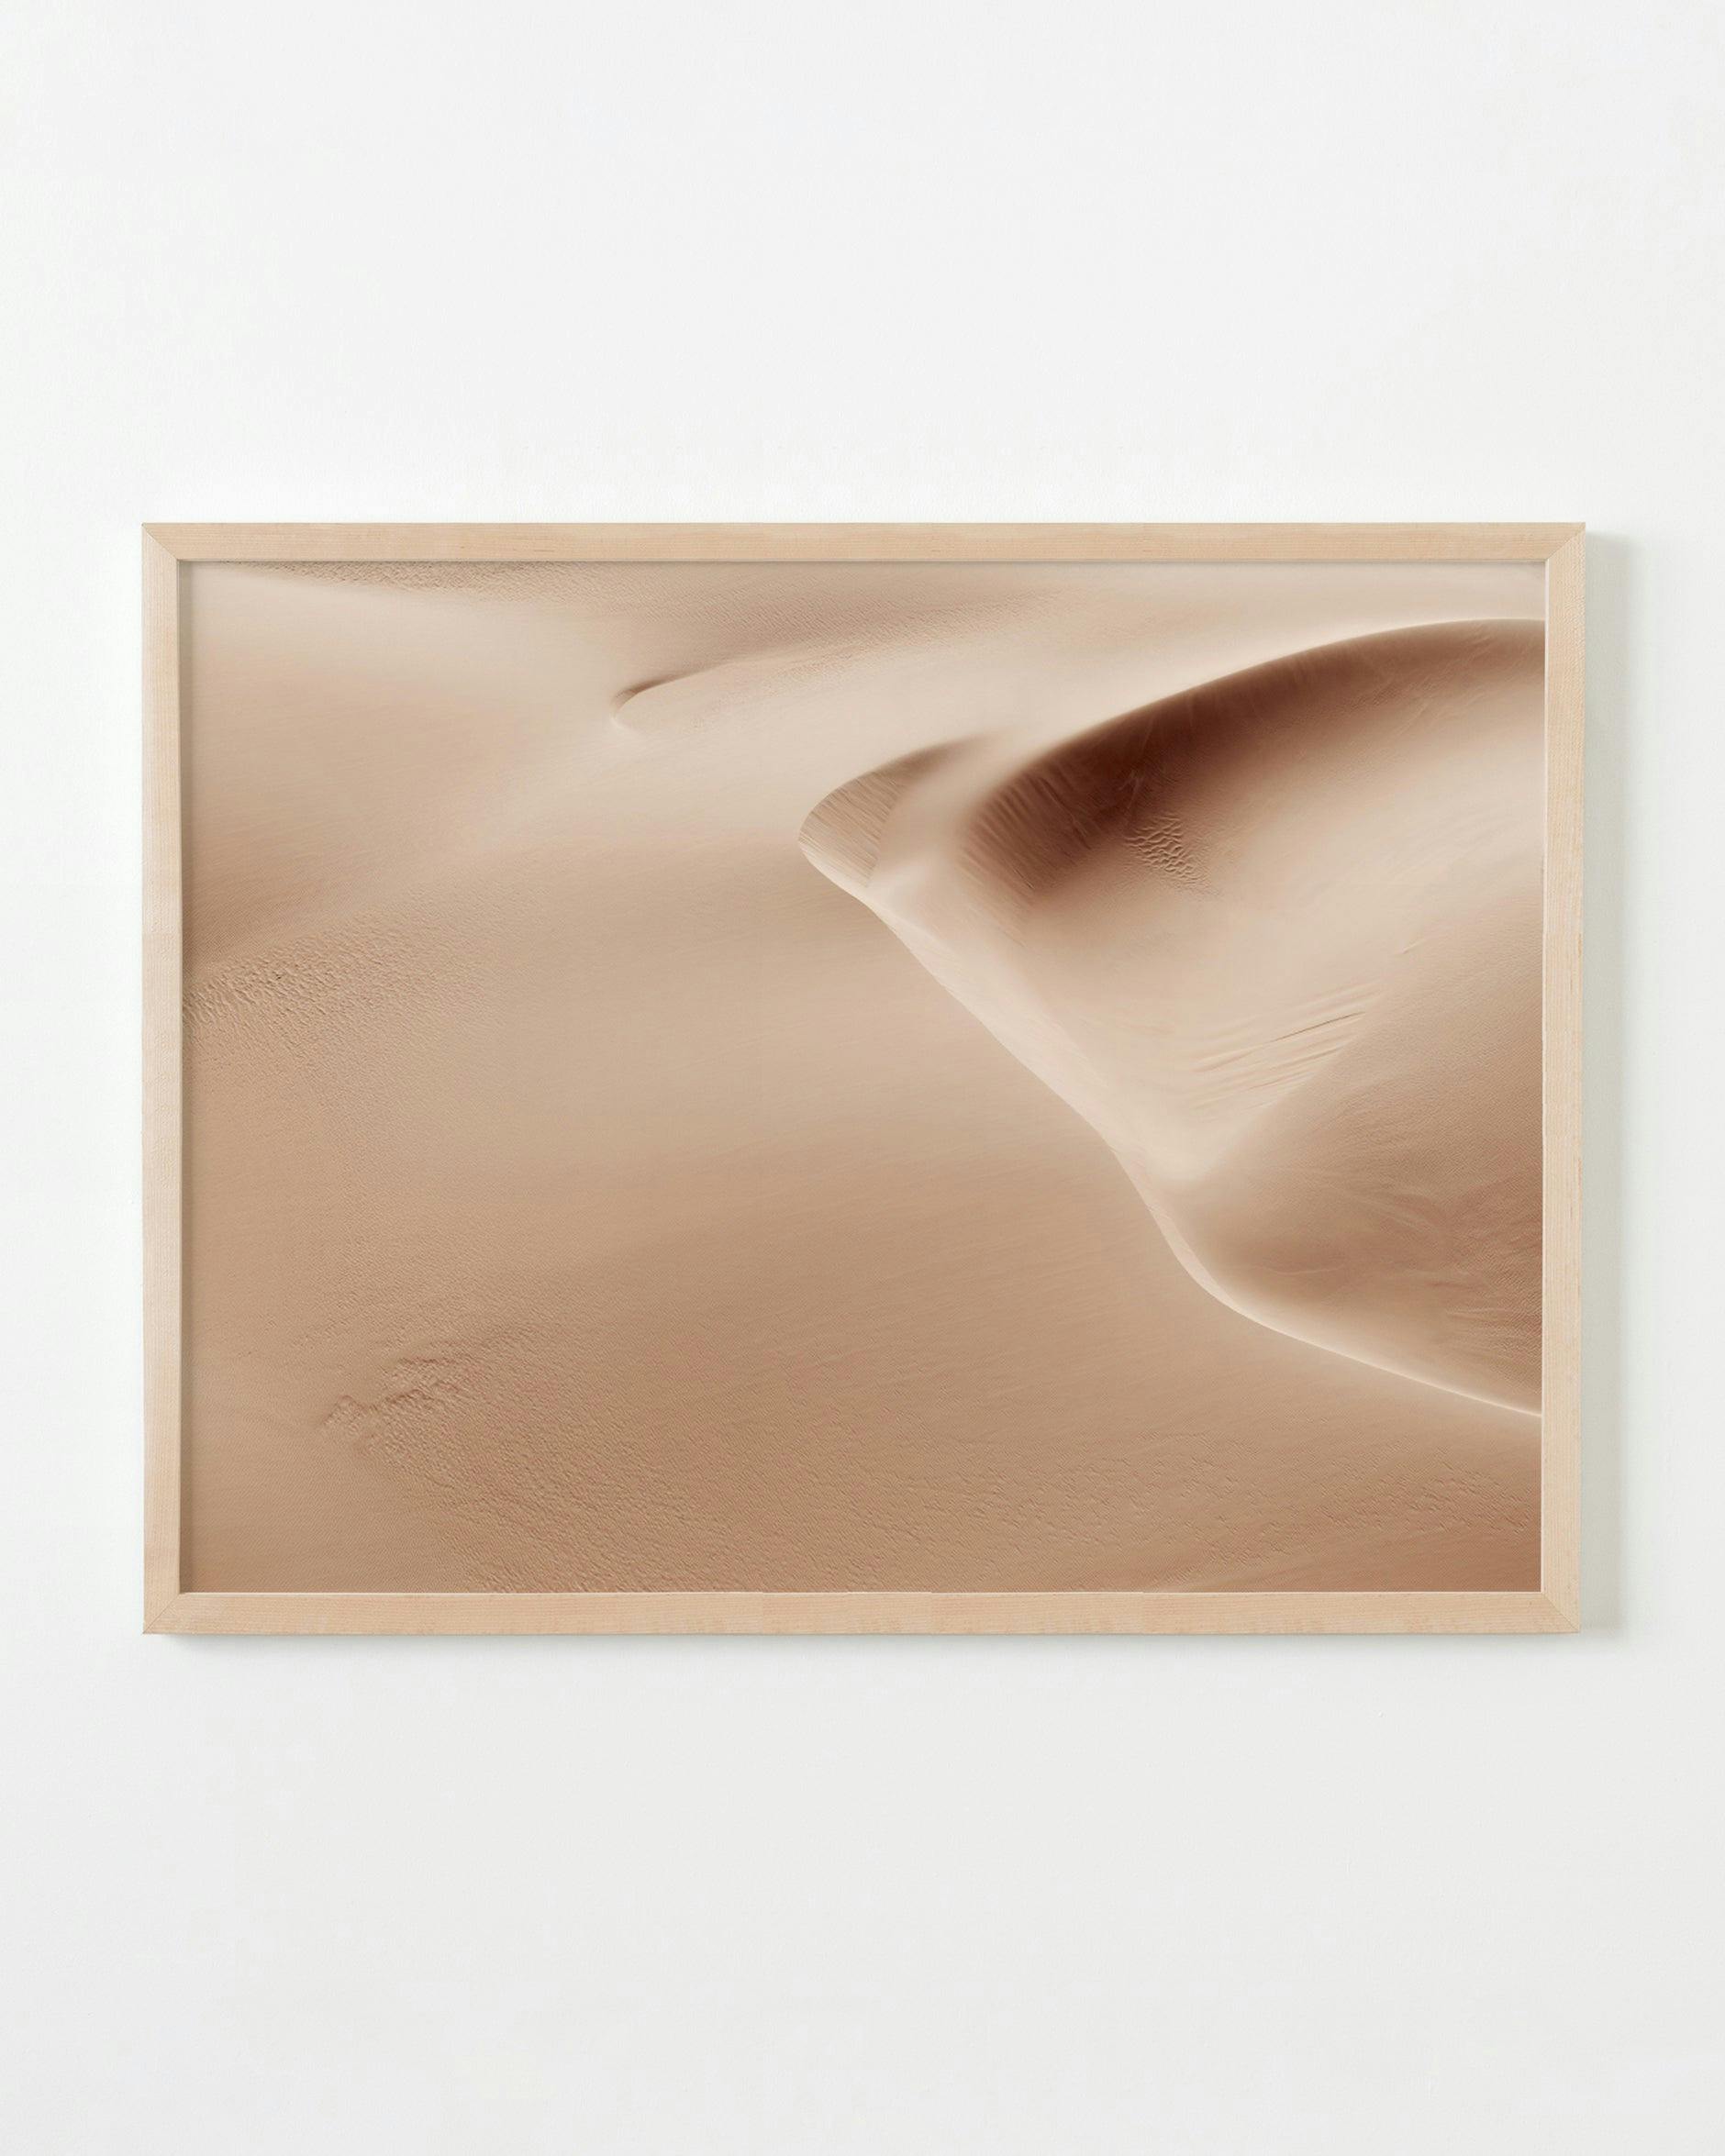 Photography by Brooke Holm titled "Sand Sea I".